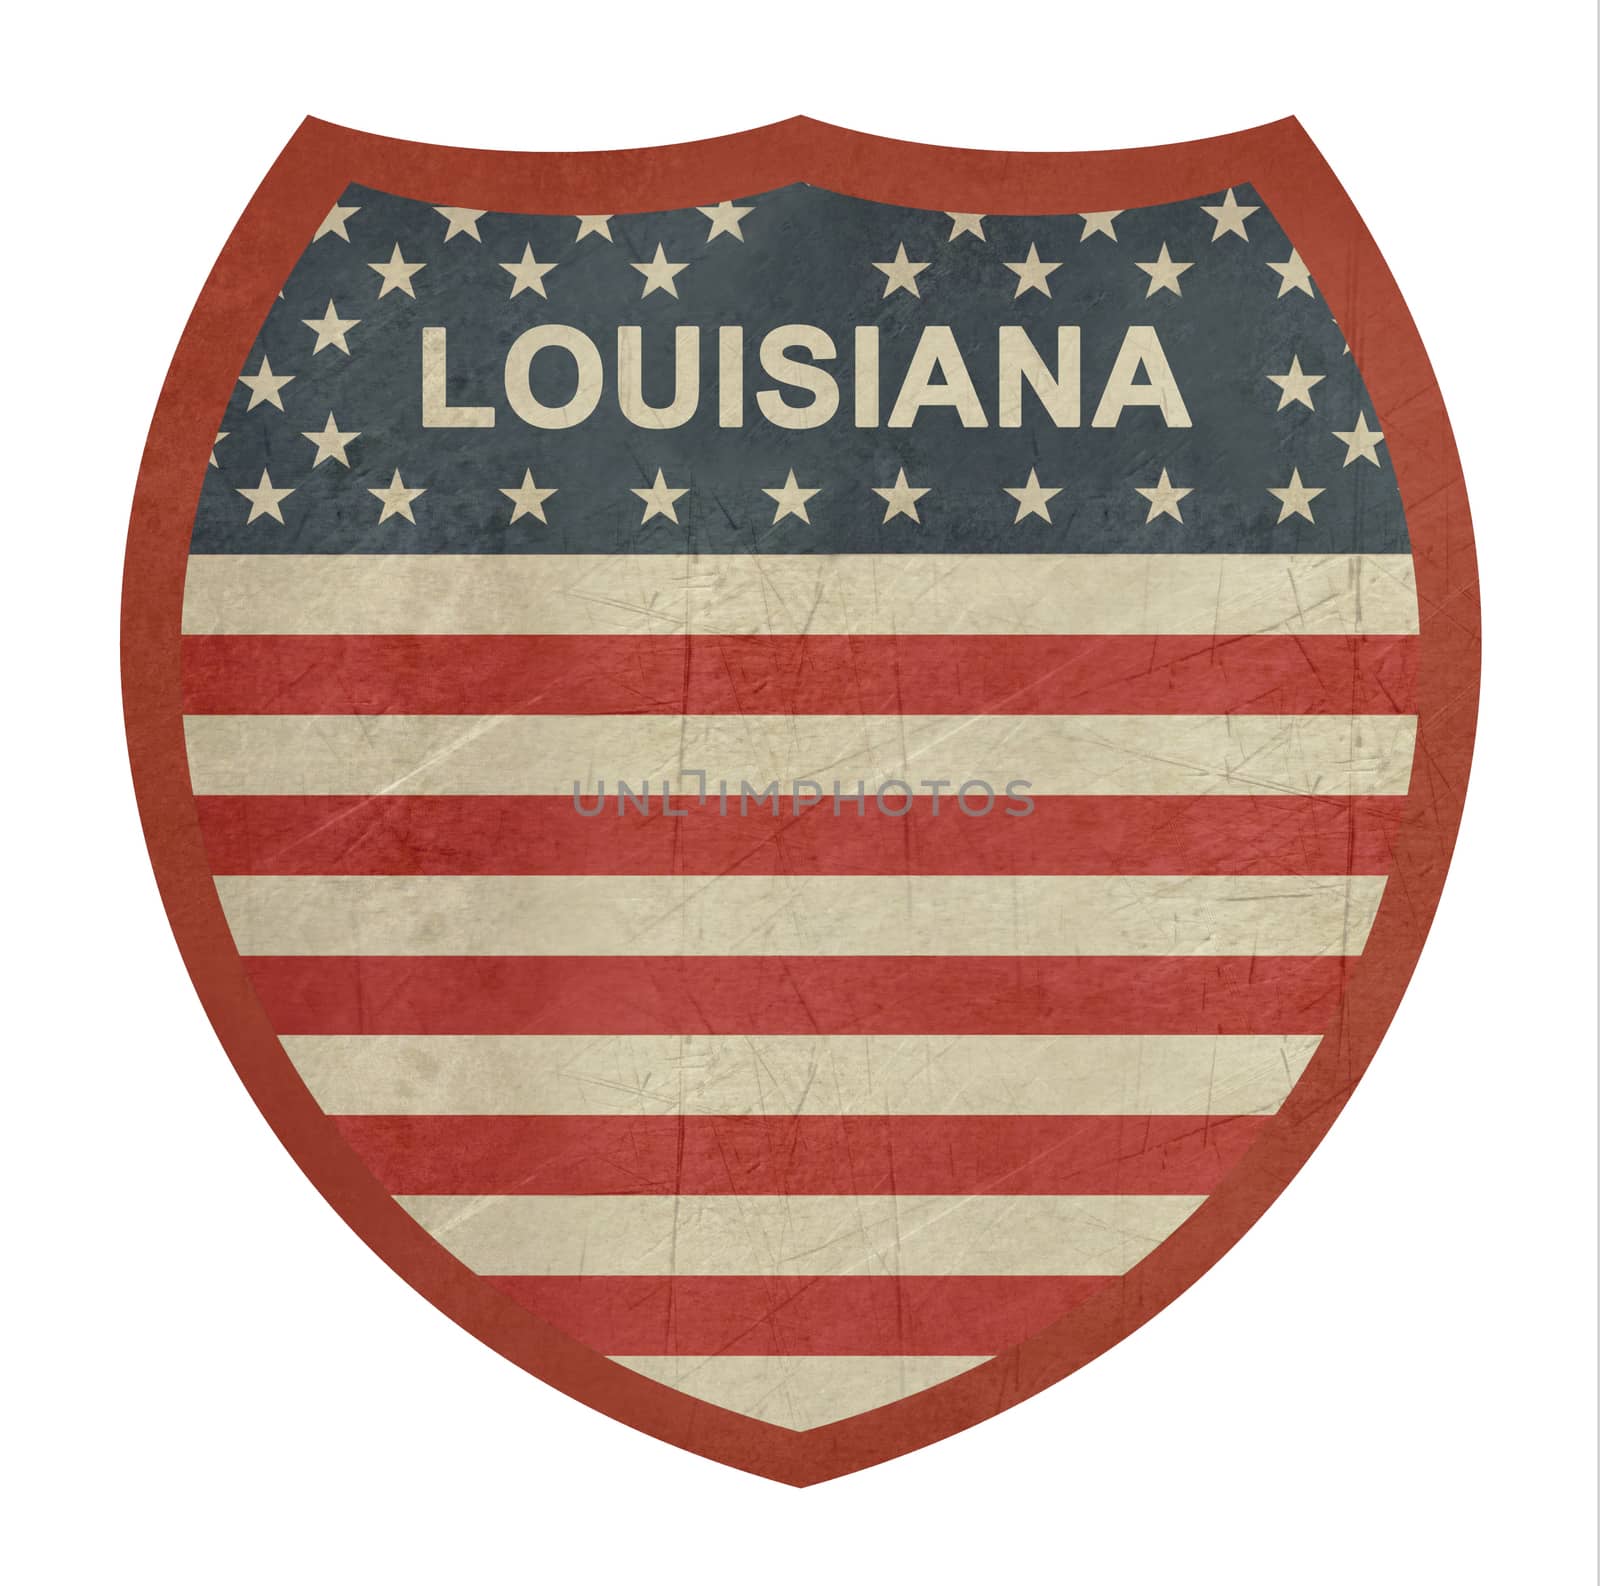 Grunge Louisiana American interstate highway sign isolated on a white background.